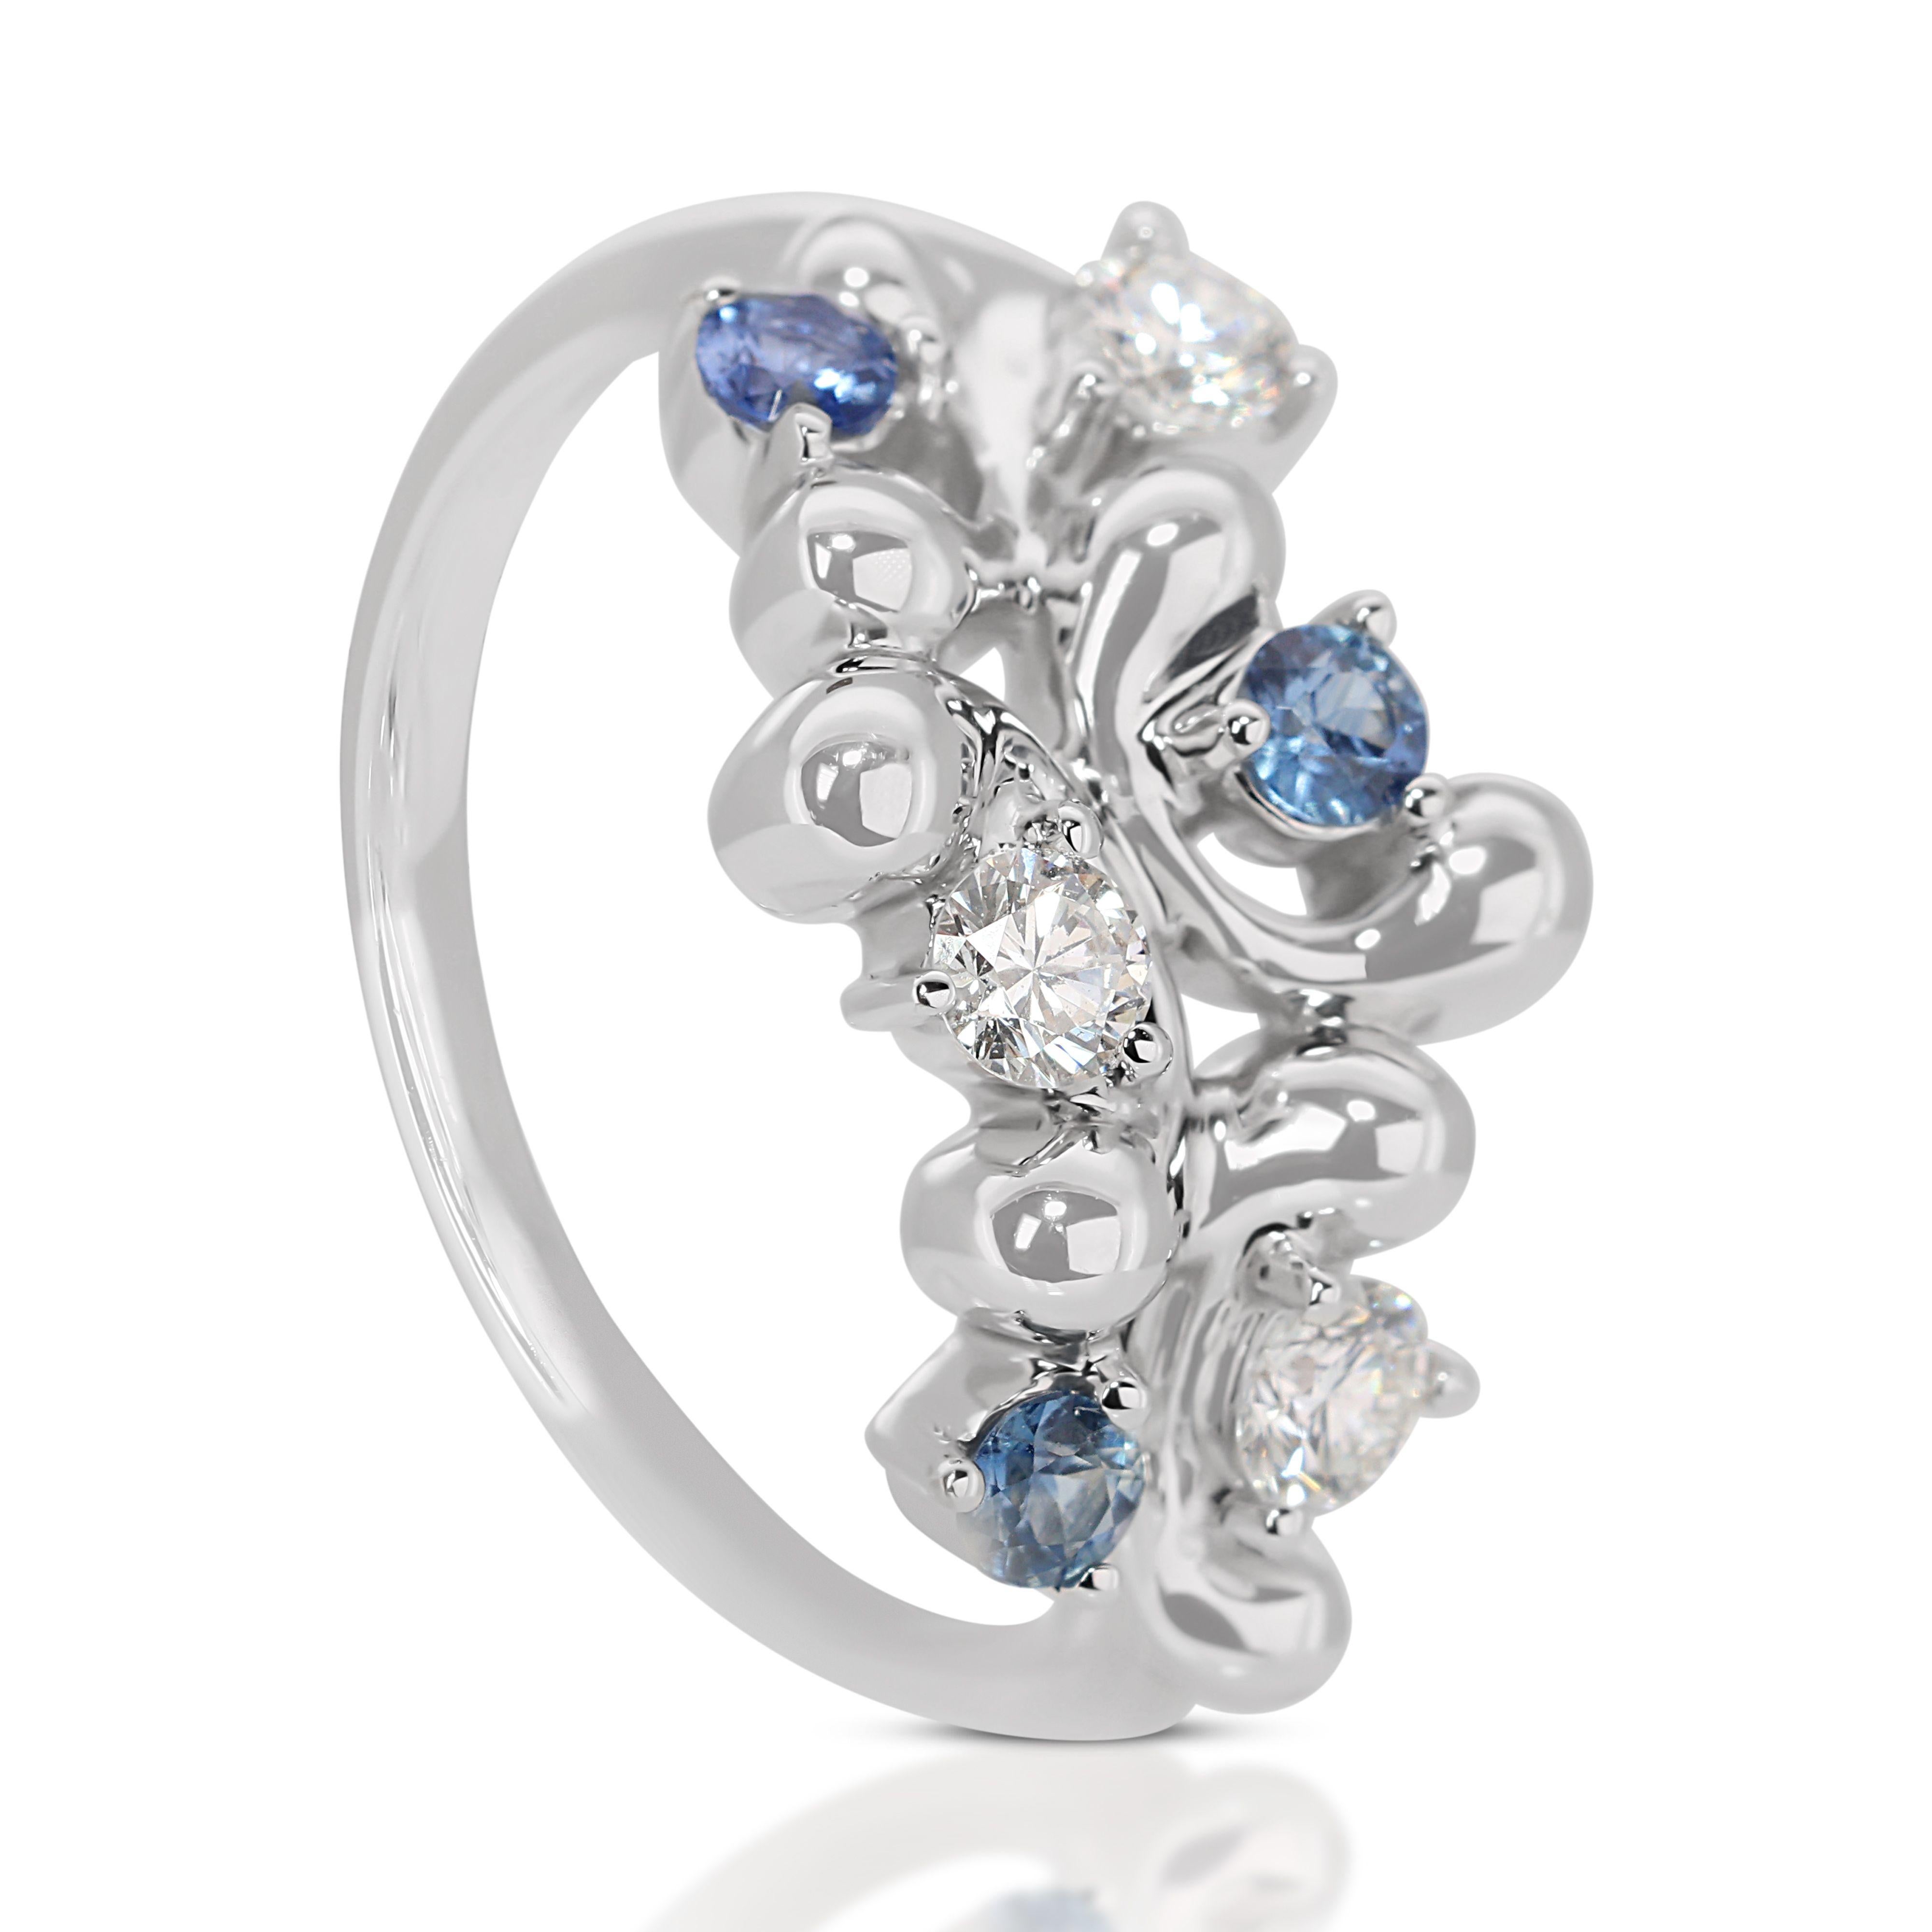 Stunning 18k White Gold Ring with  0.24 Ct Sapphire and Diamonds NGI Cert. For Sale 2